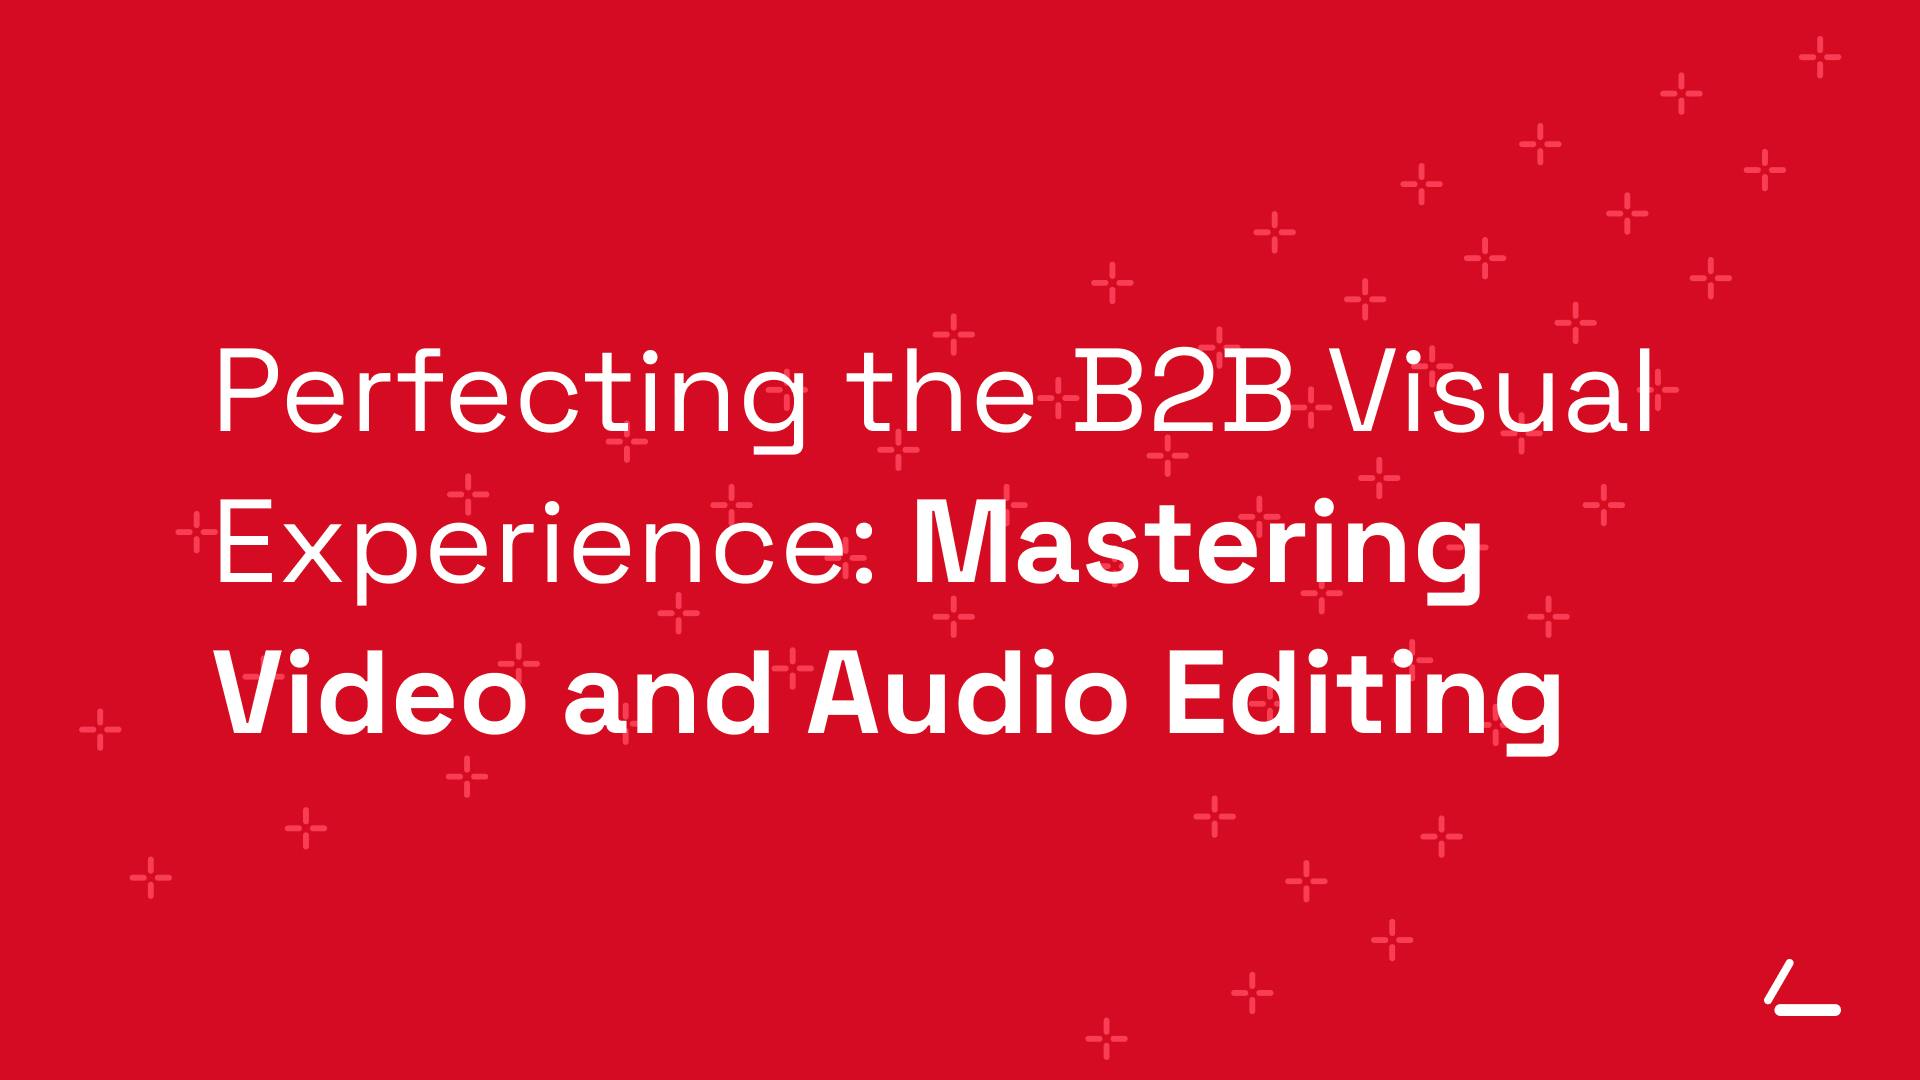 SEO Article Header - Red background with text about Video Editing